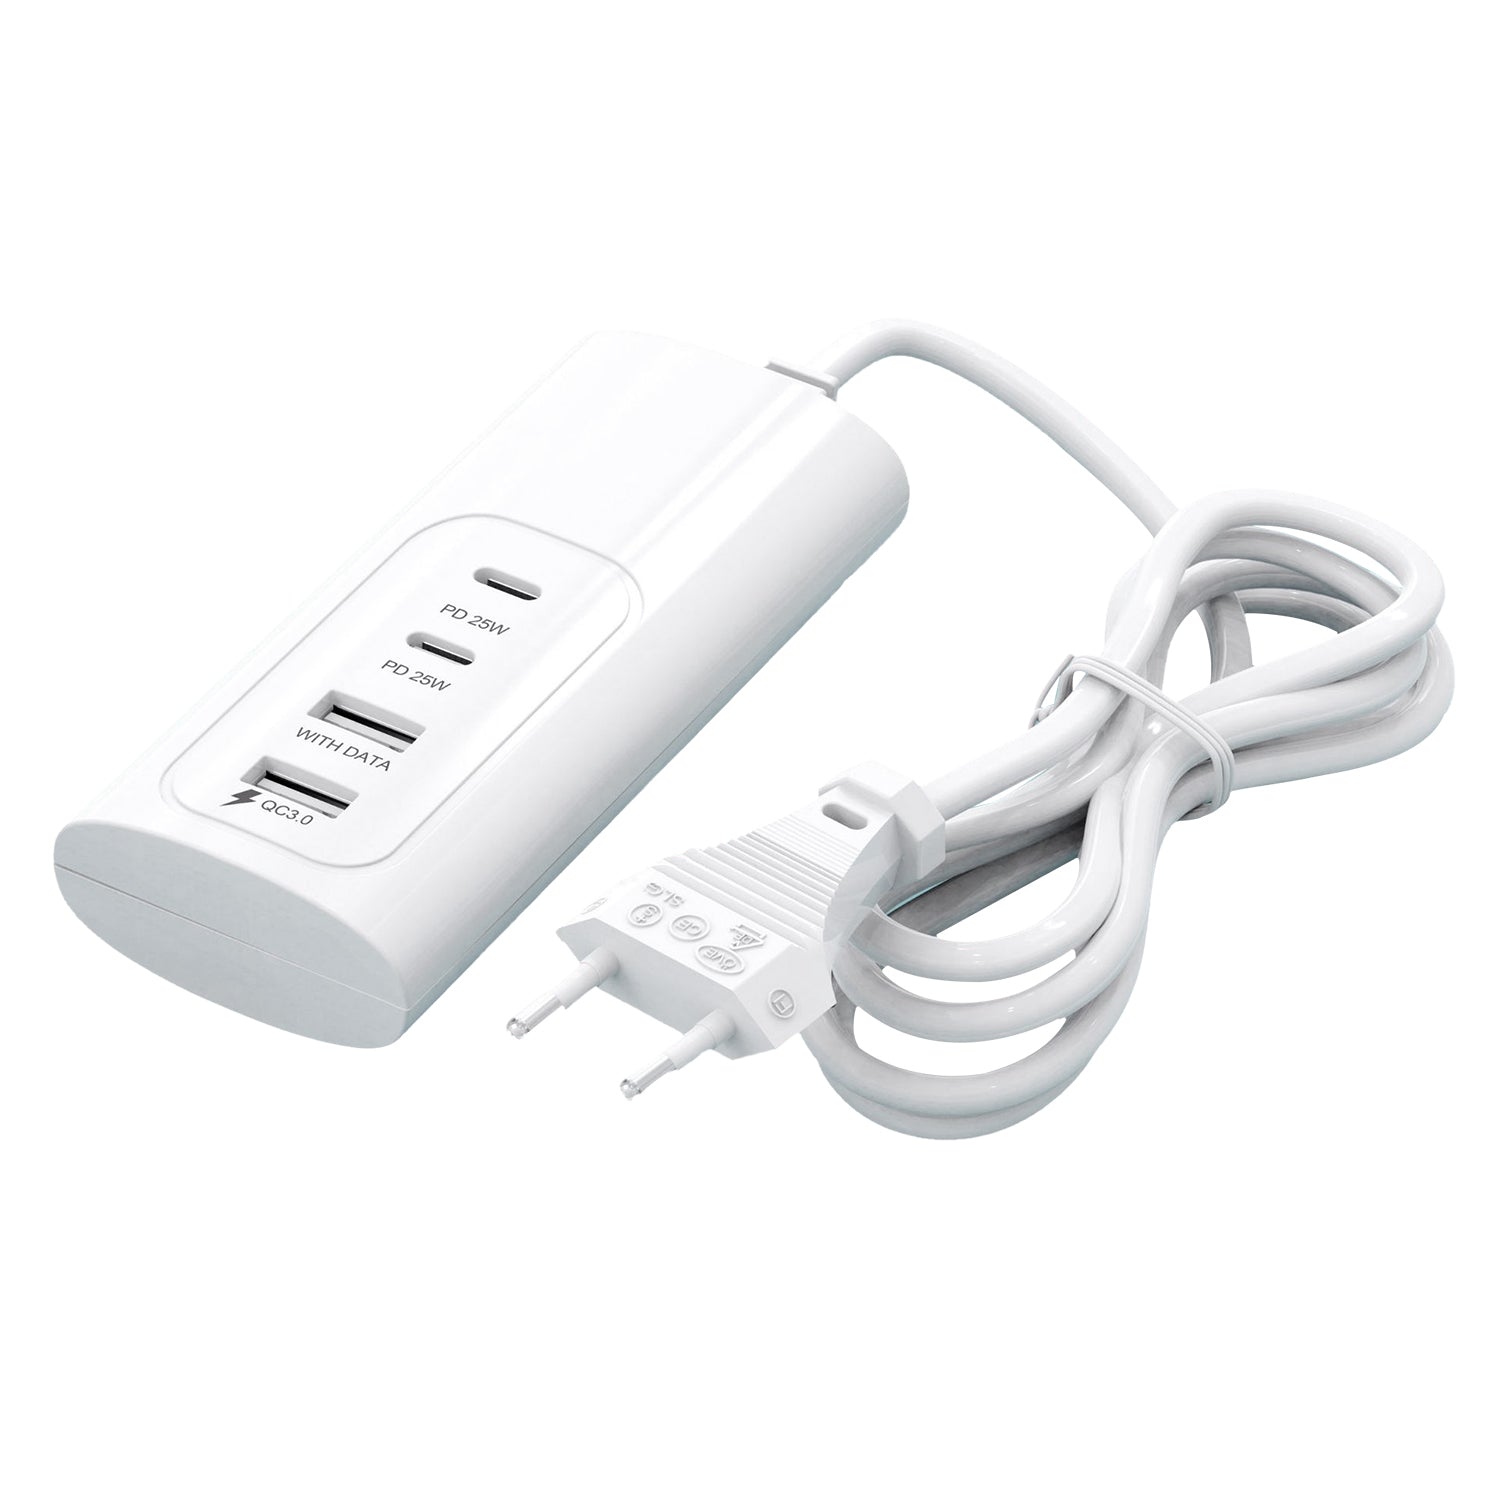 1m EU Plug PD 25W Fast Charger 2 USB + 2 Type-C Phone Tablet Bluetooth Earphone Charging Station